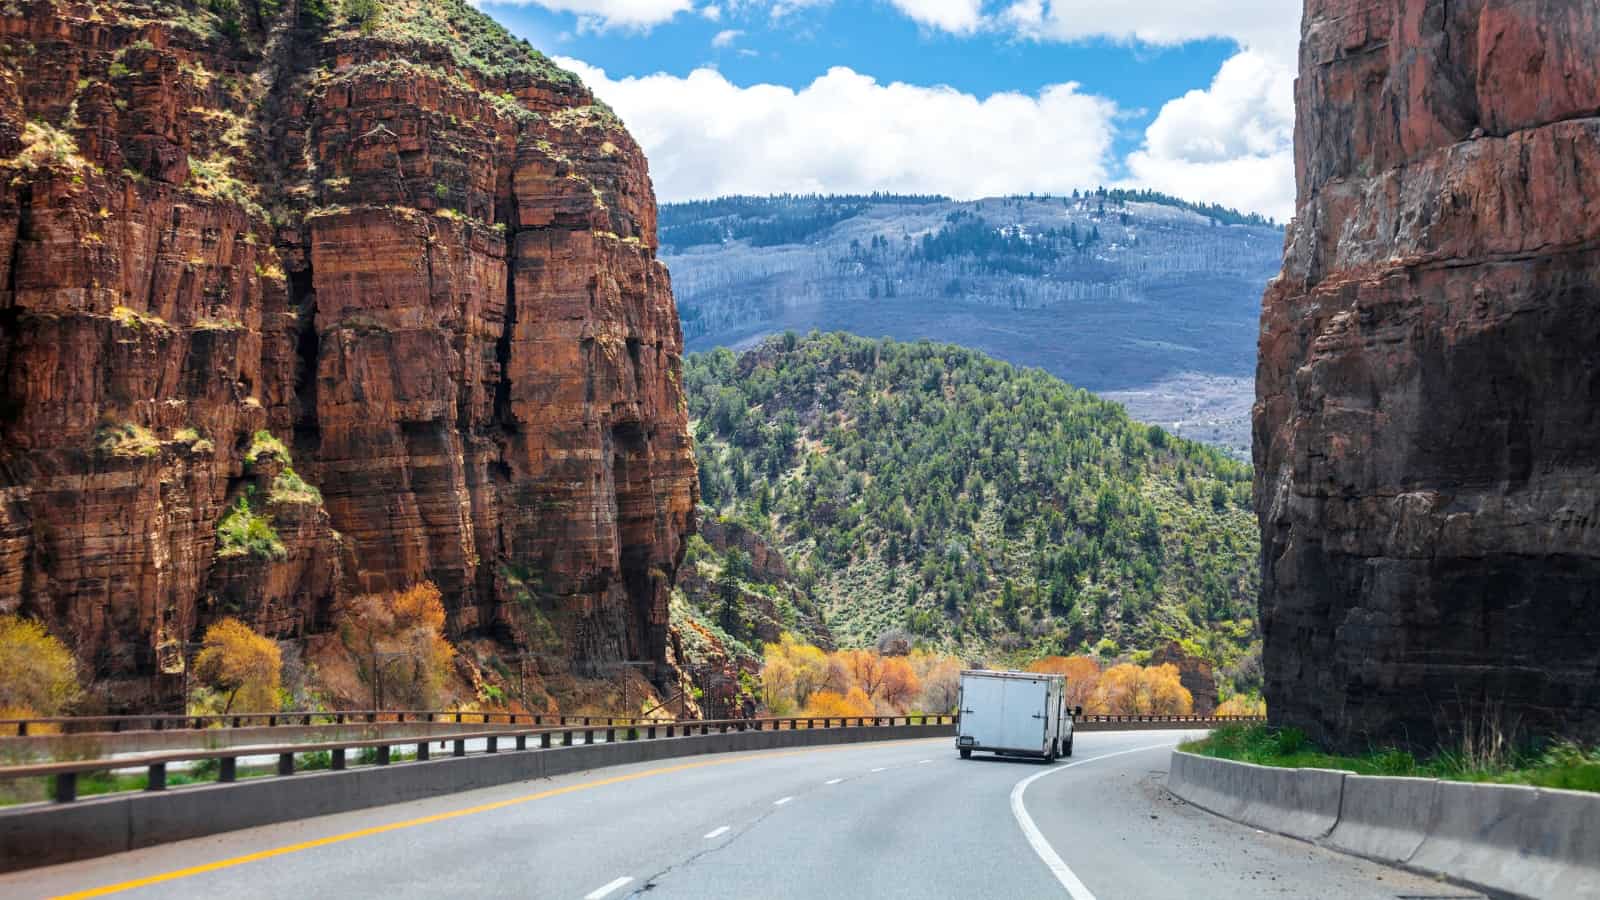 Driving in canyons, Colorado